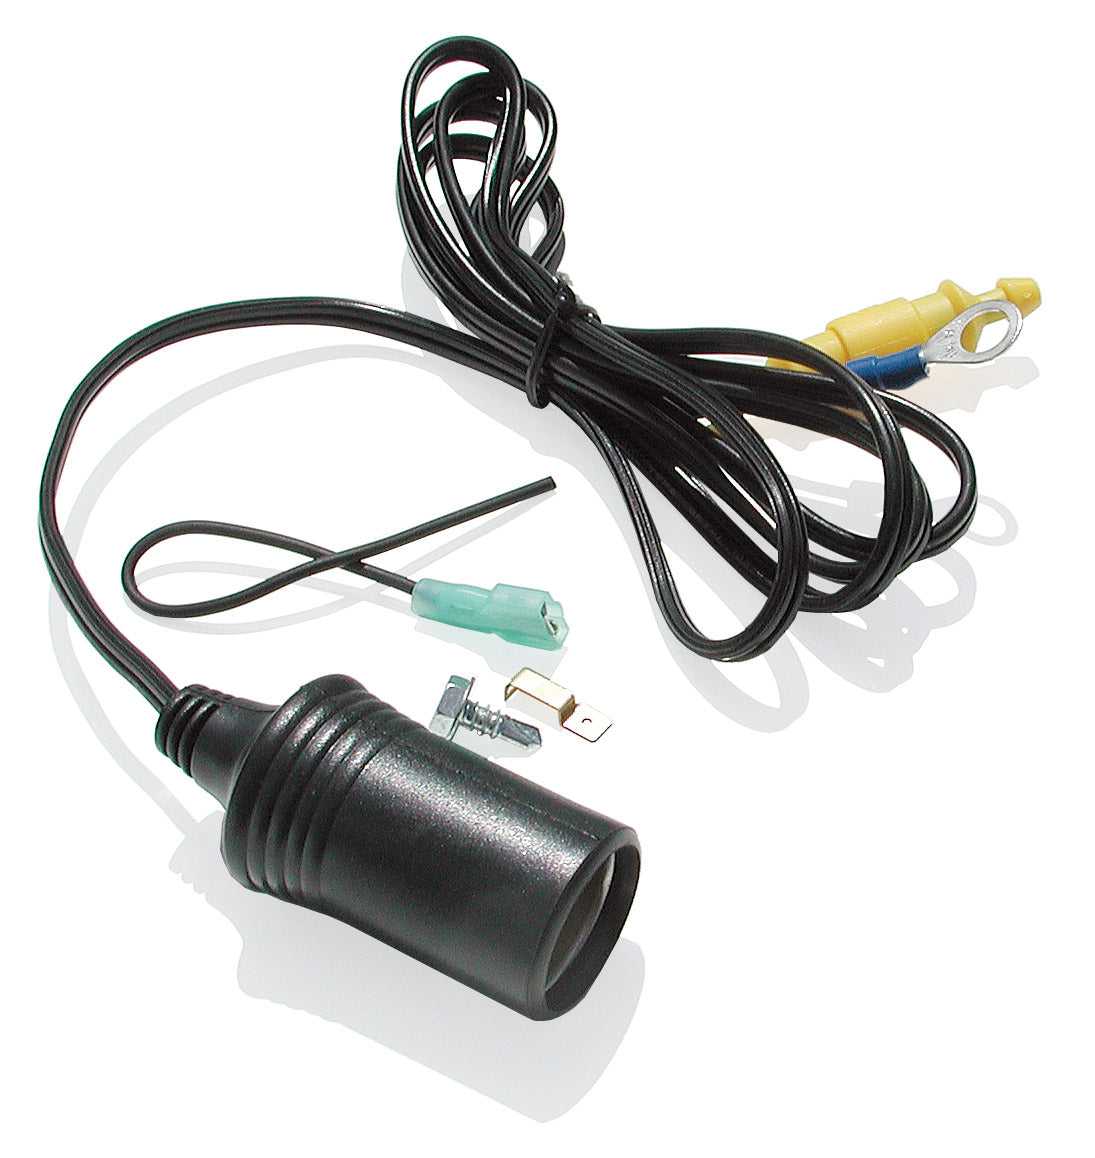 9332 Roadmaster Power Cord Adapter For Providing Power To Roadmaster